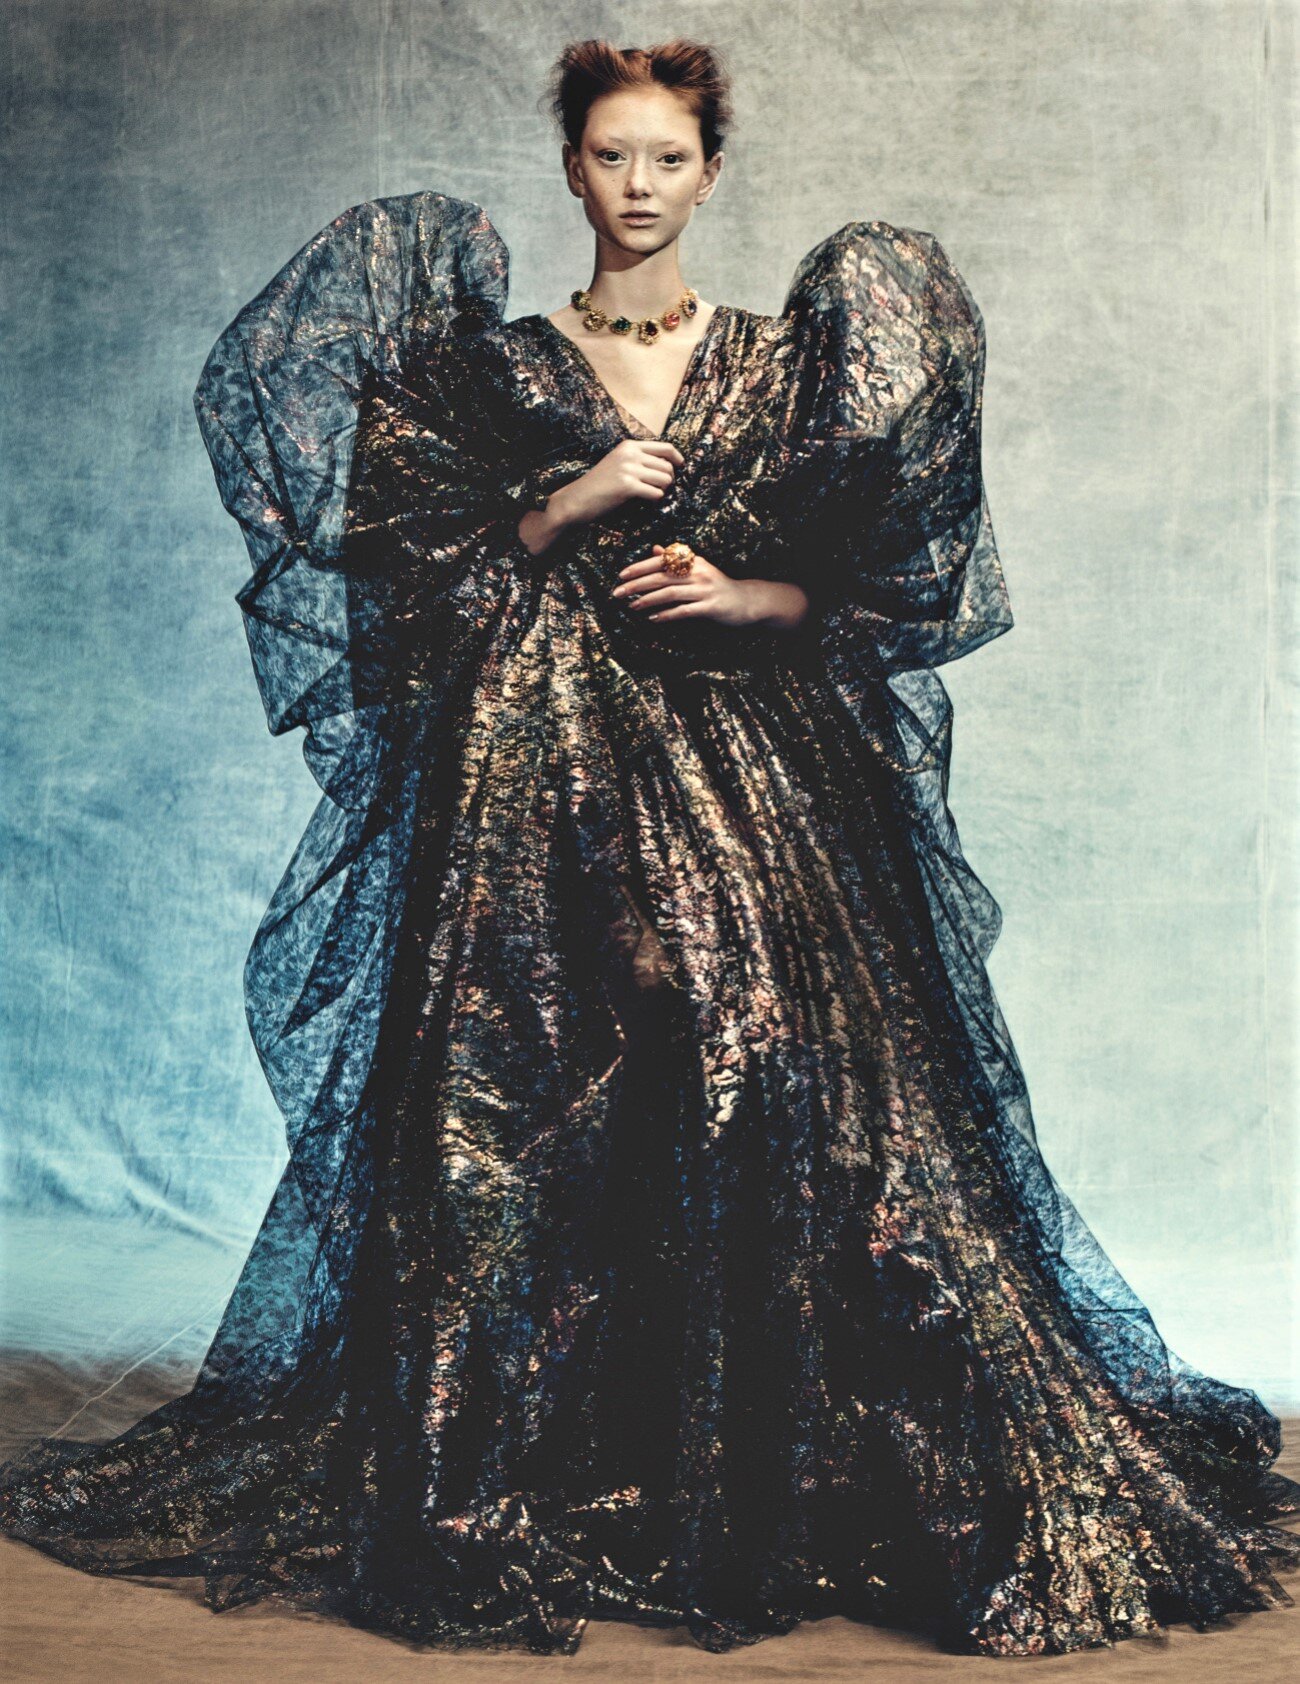 Paolo Roversi  'High Drama' for Vogue UK April 2020 (3).jpg